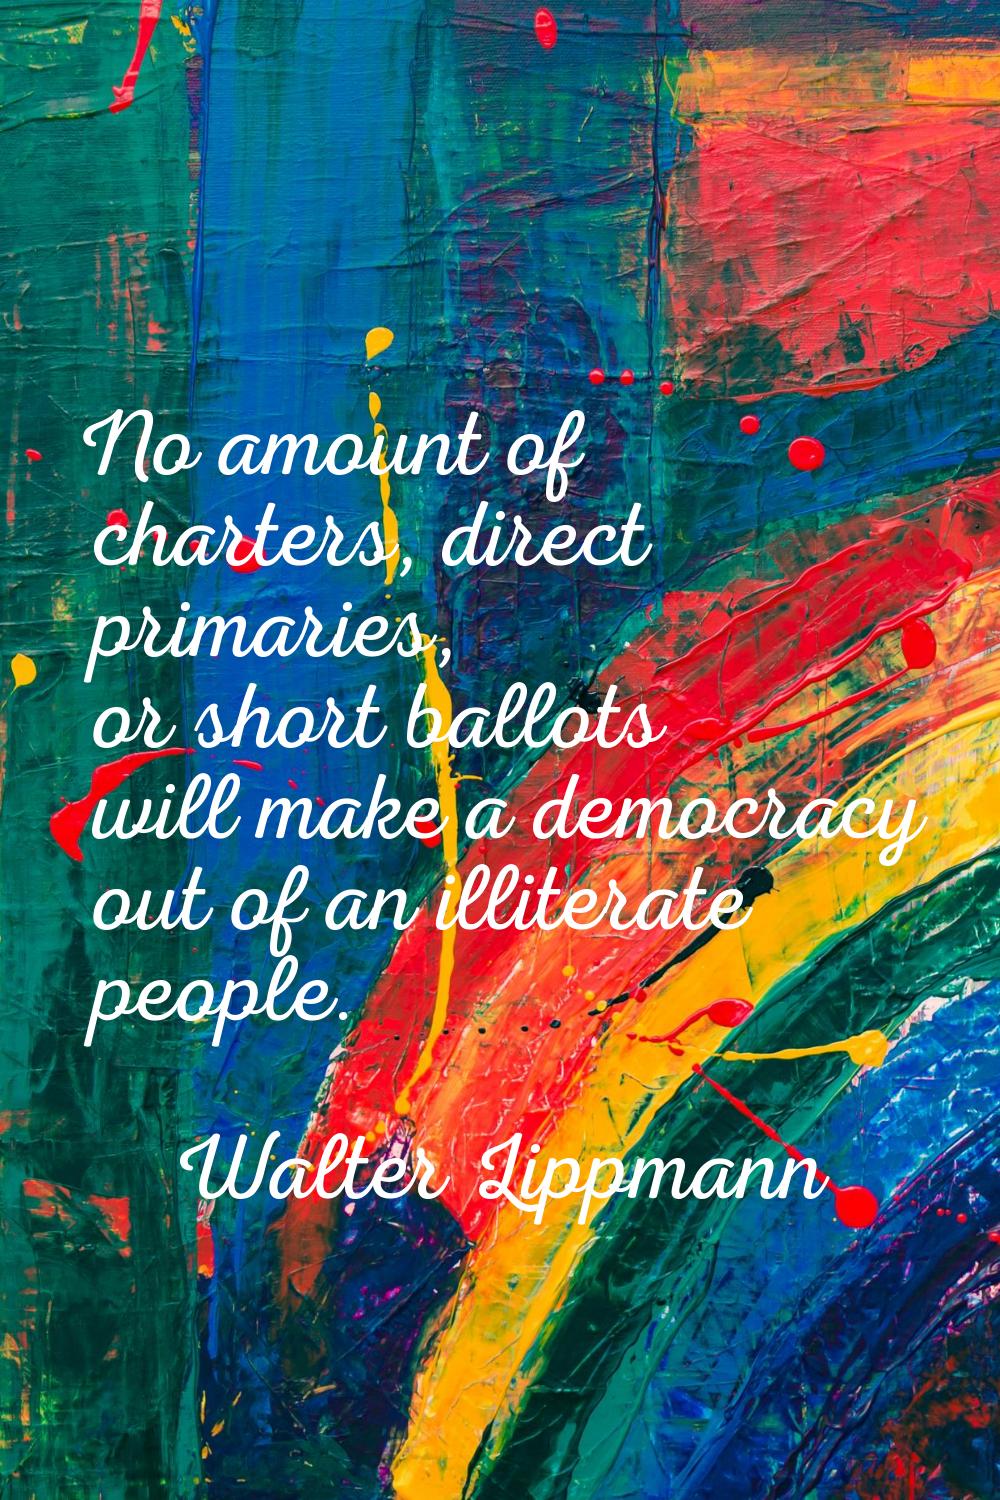 No amount of charters, direct primaries, or short ballots will make a democracy out of an illiterat